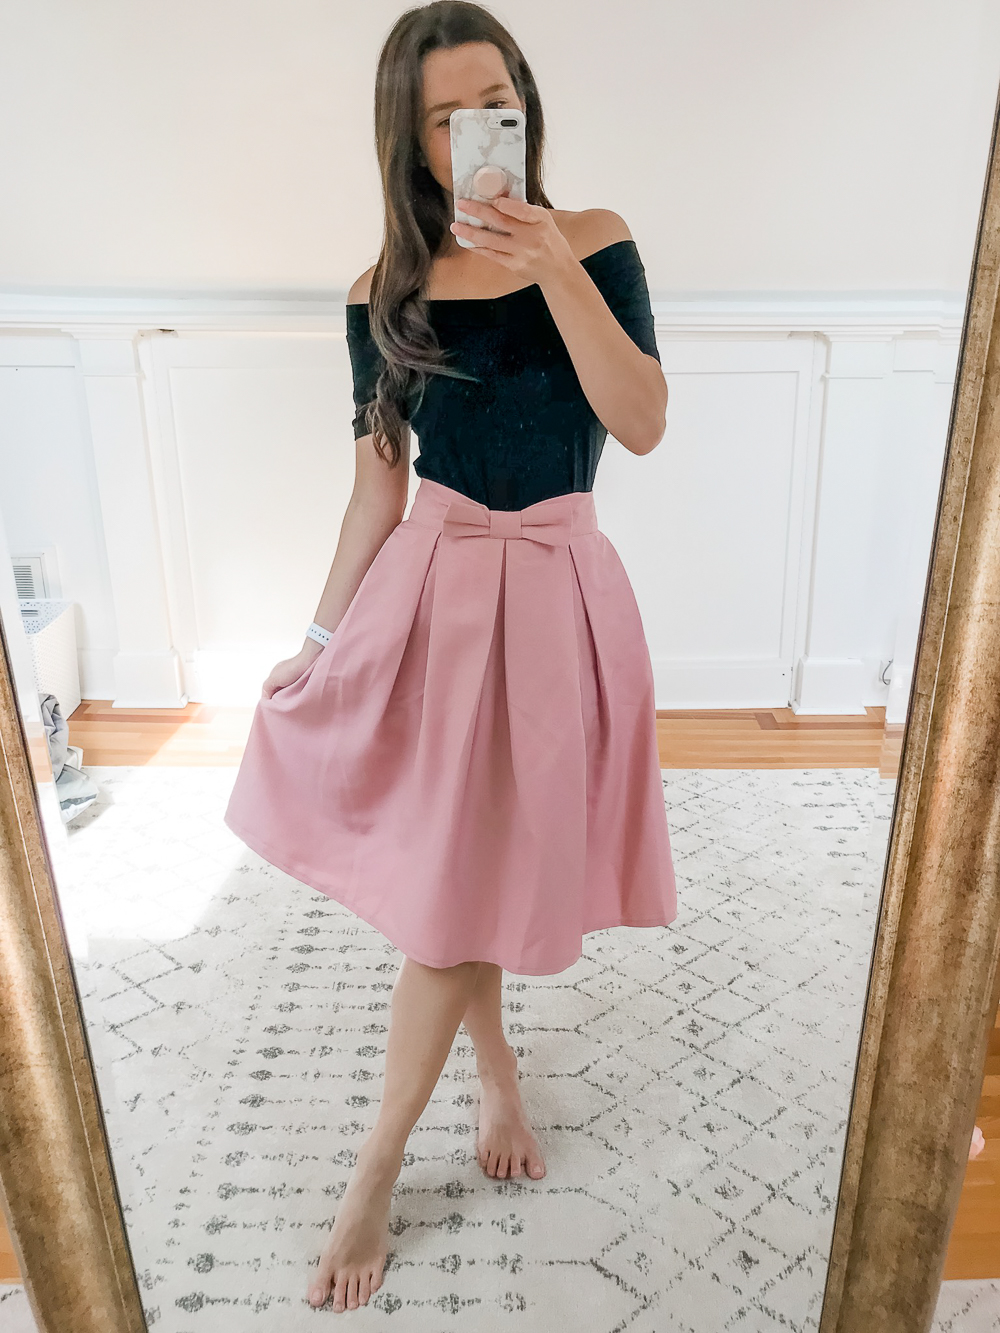 Amazon Black Off-Shoulder Top and Amazon Pink Bow Pleated Midi Skirt, Amazon Prime Day Try-On Haul: Top Affordable Fashion Finds